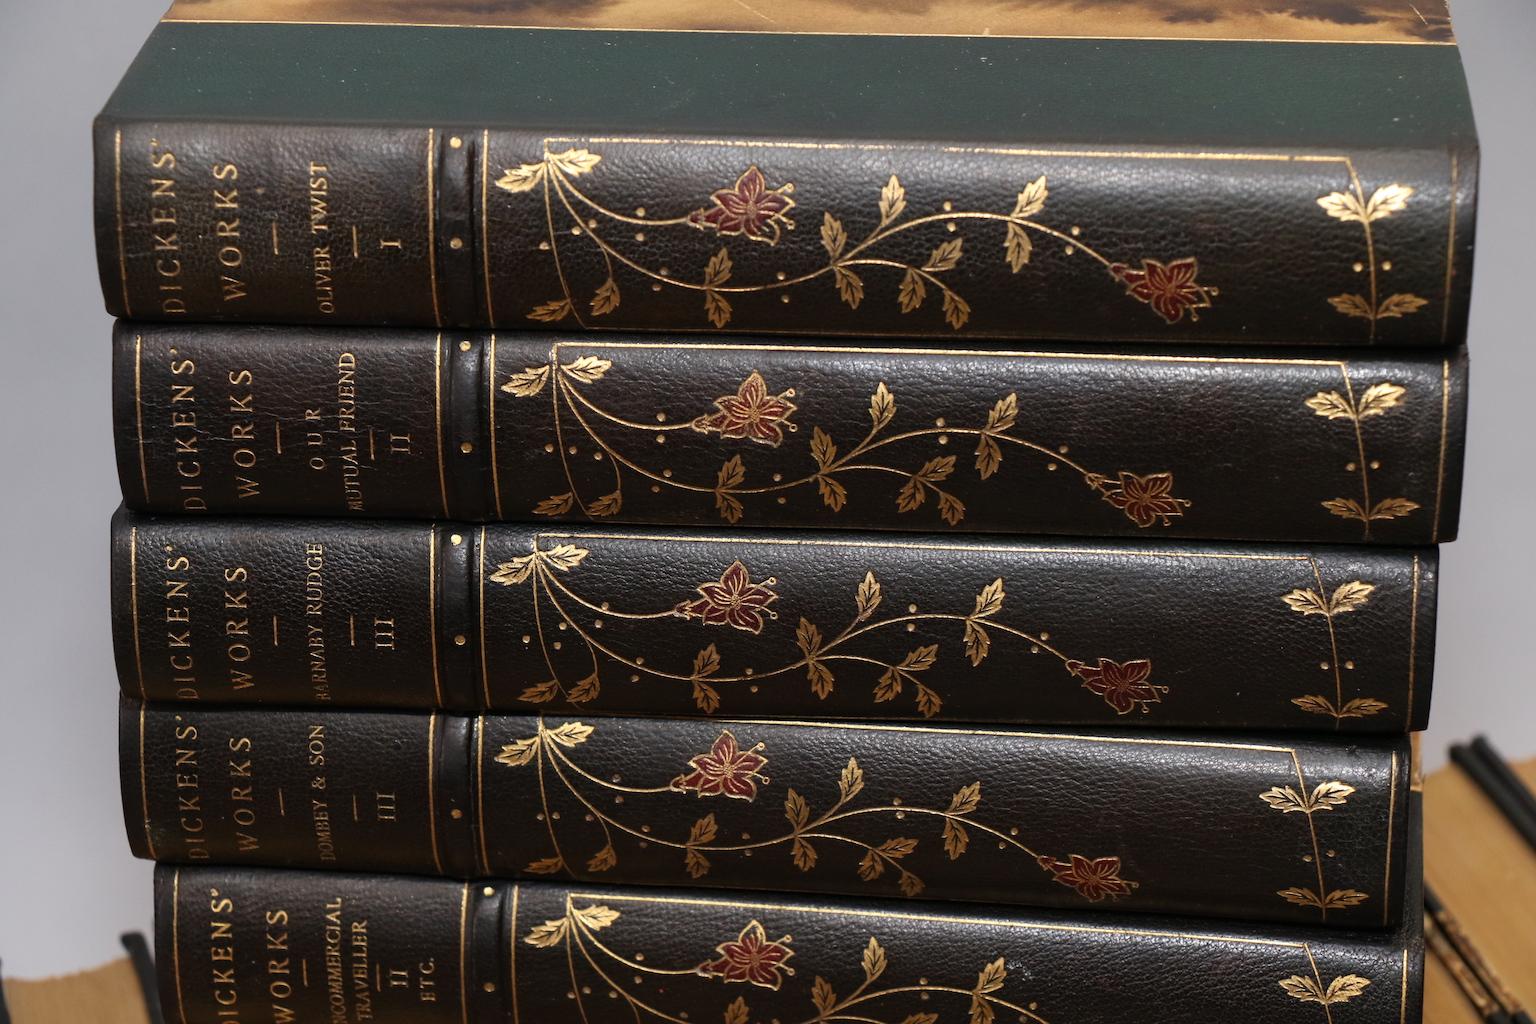 New Century Edition. Leatherbound. 48 volumes. Bound in 3/4 green Morocco with marbled boards, top edges gilt, & raised bands, as well as ornate floral gilt tooling on spines. Illustrated. Very good. Published in Boston by Dana Estes & Co. Not